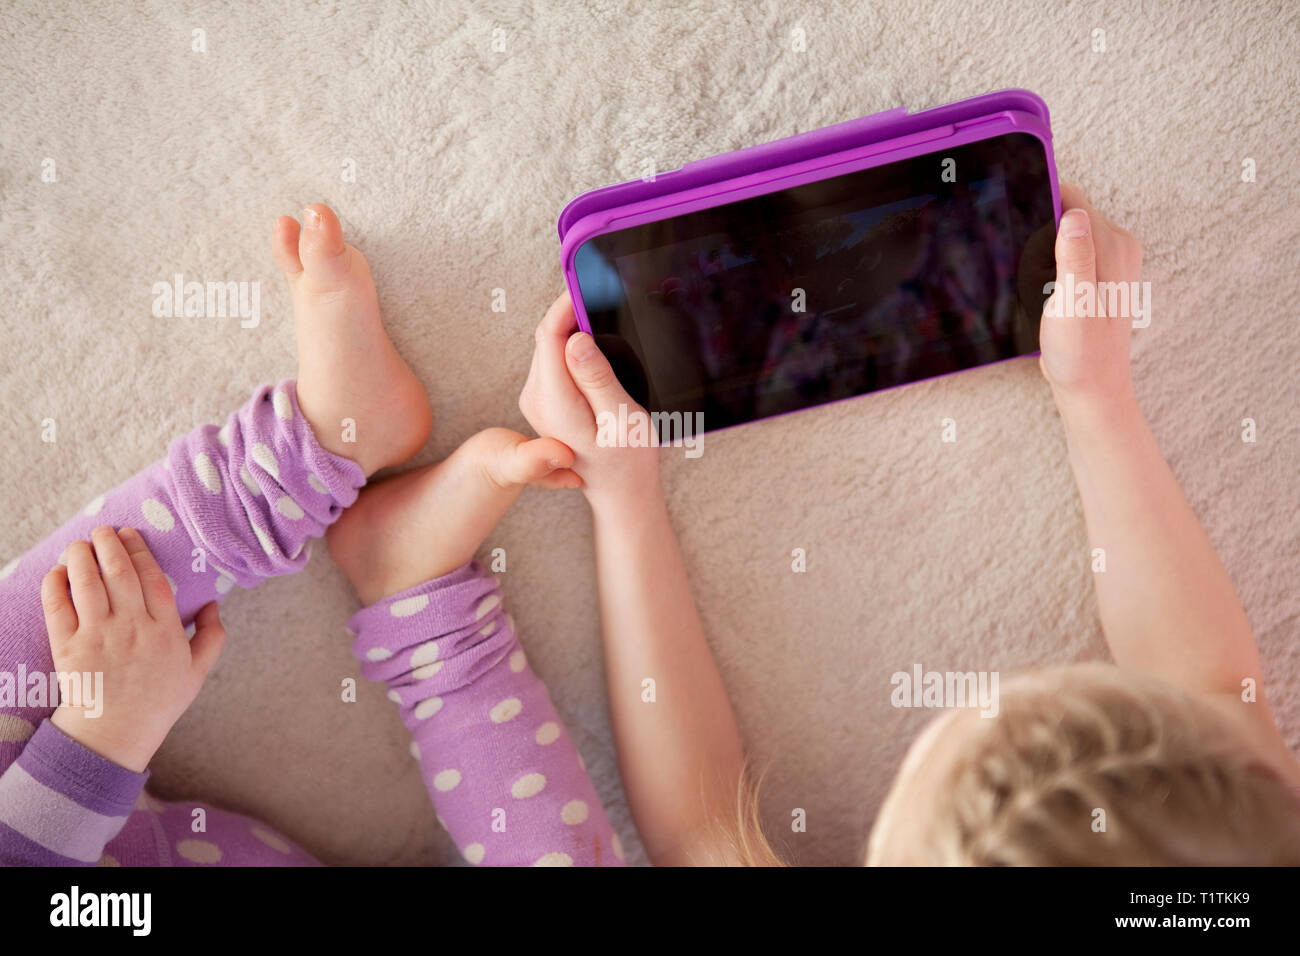 Overhead view of a child and toddler using a tablet device in a home environment Stock Photo